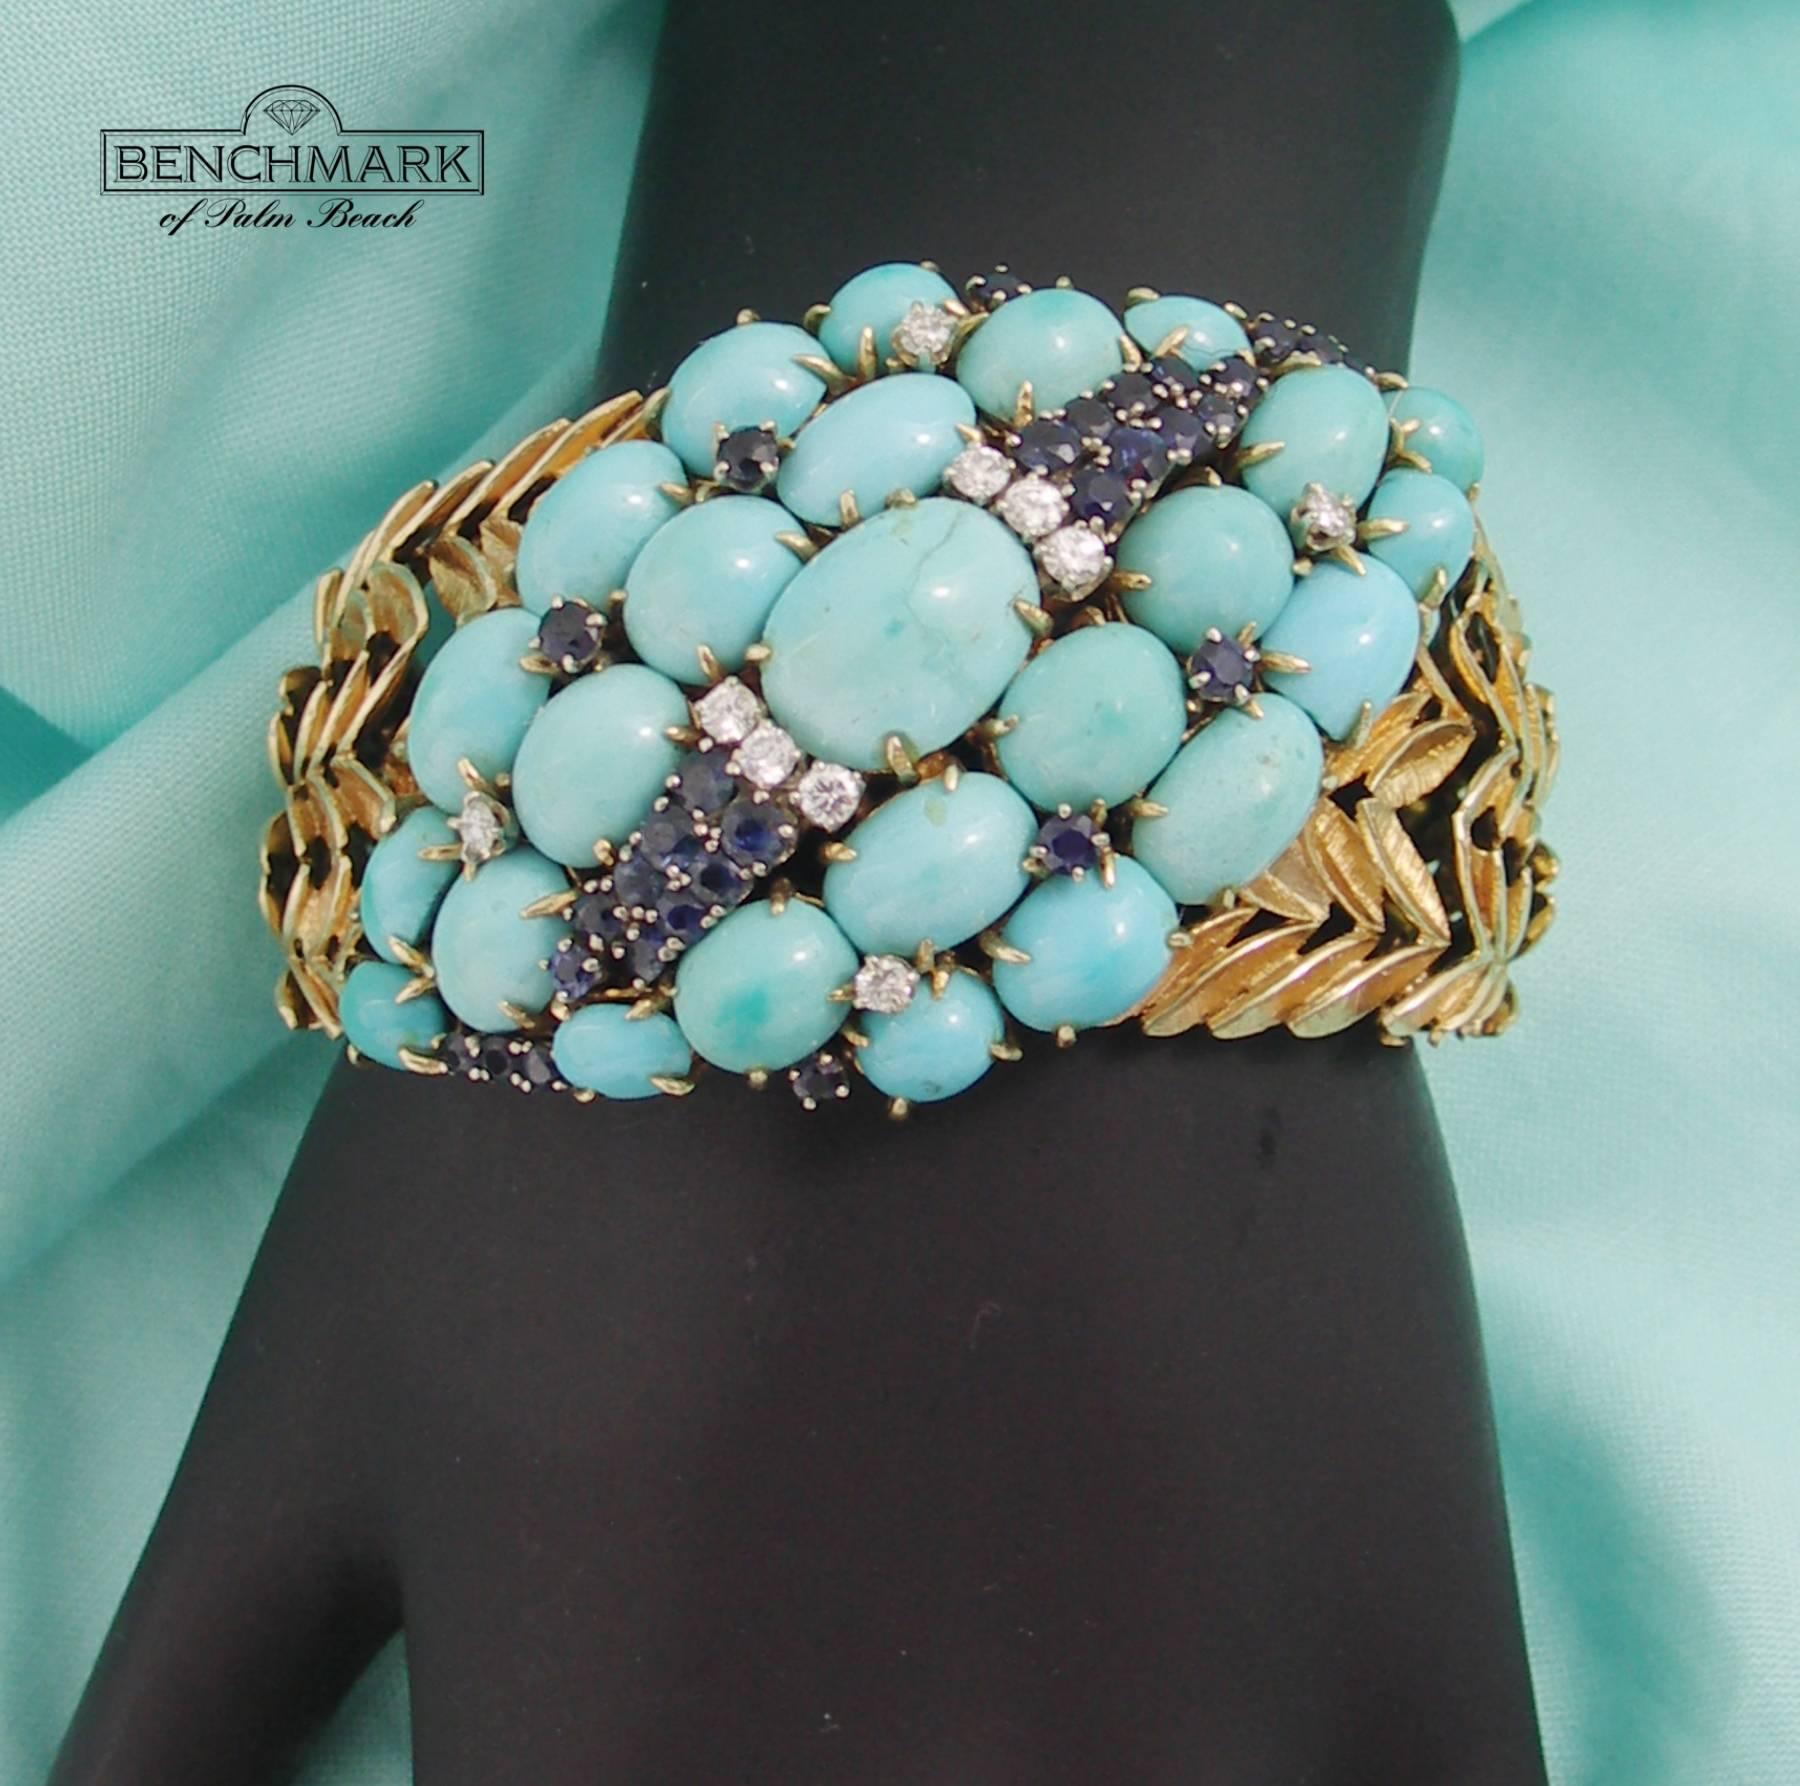 An 18K yellow gold bracelet, comprised of graduating organic motif links, set with cabochon cut turquoise, faceted sapphires, and round brilliant cut diamonds. There are a total of 30 sapphires weighing 3ct total approximate weight, and 10 diamonds